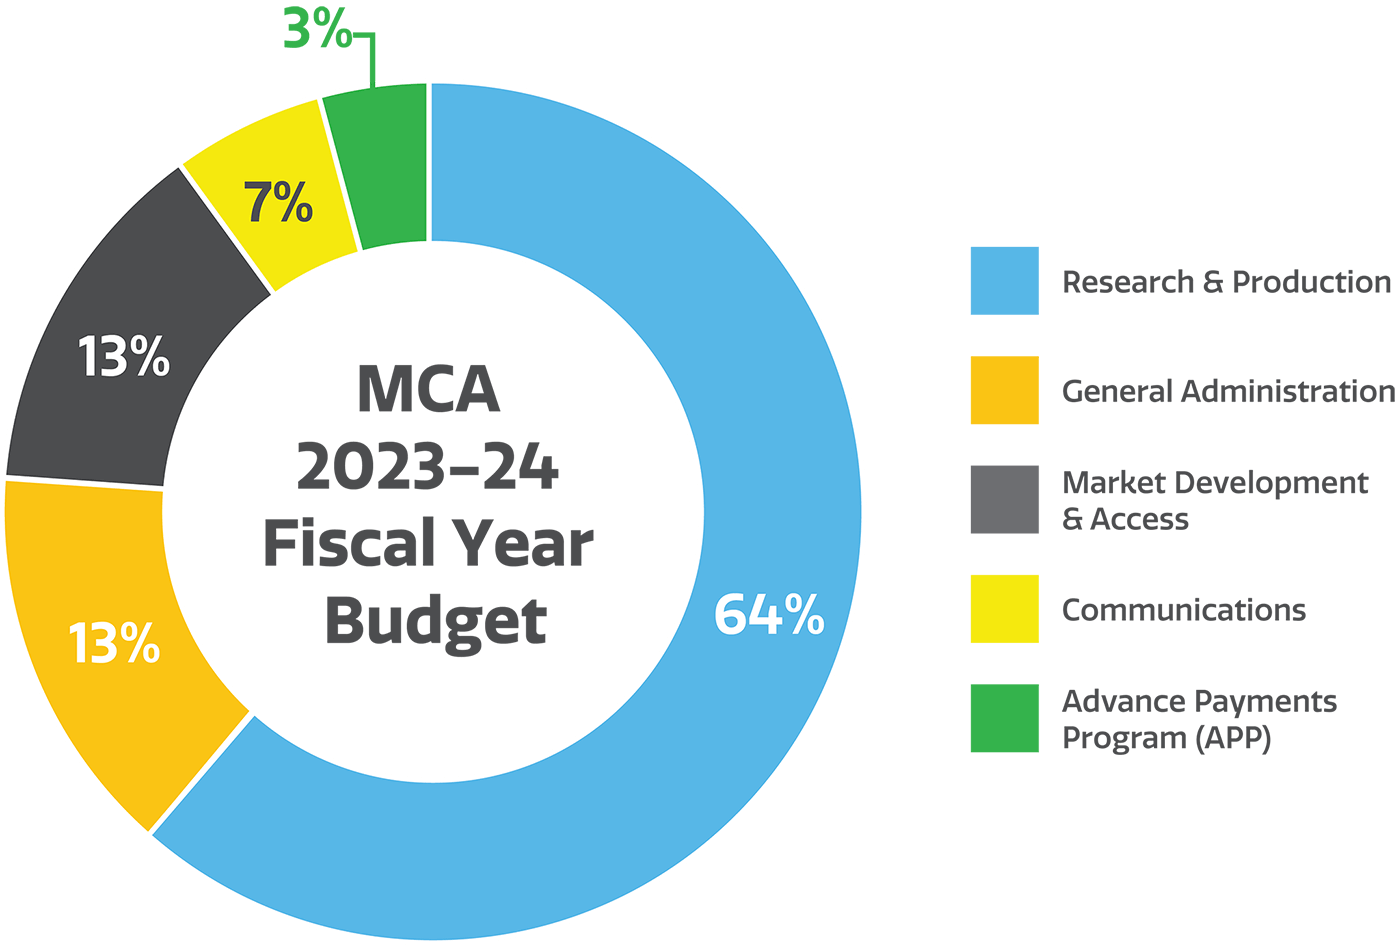 MCA_Donut-Chart-2023-24-Fiscal-Year-Budget-v2-opt